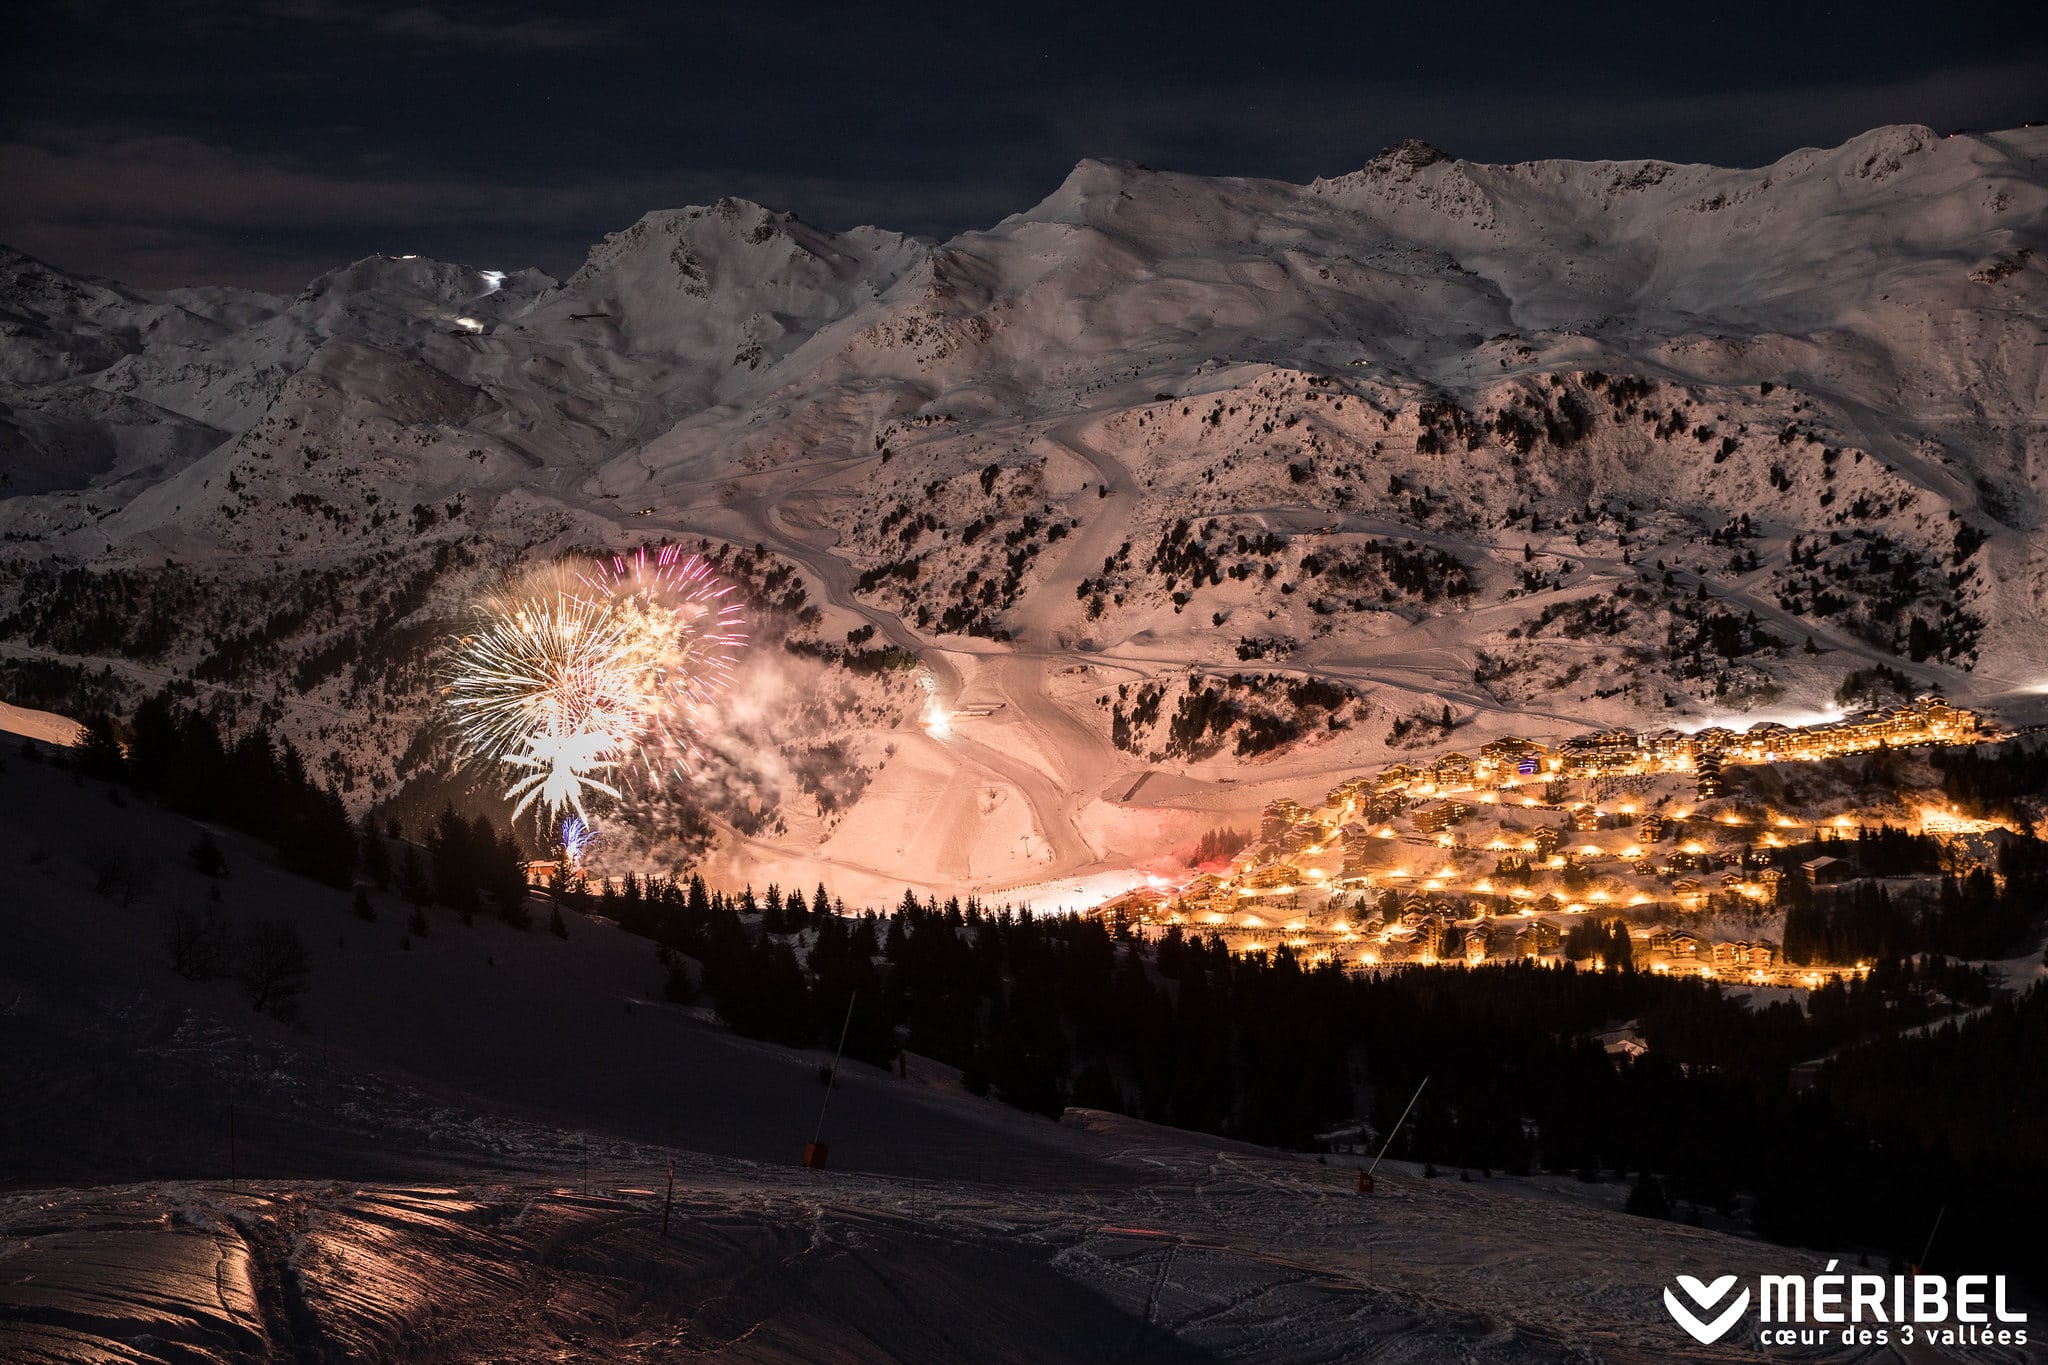 Watch The Fireworks In Meribel From Your Luxury Ski Chalet